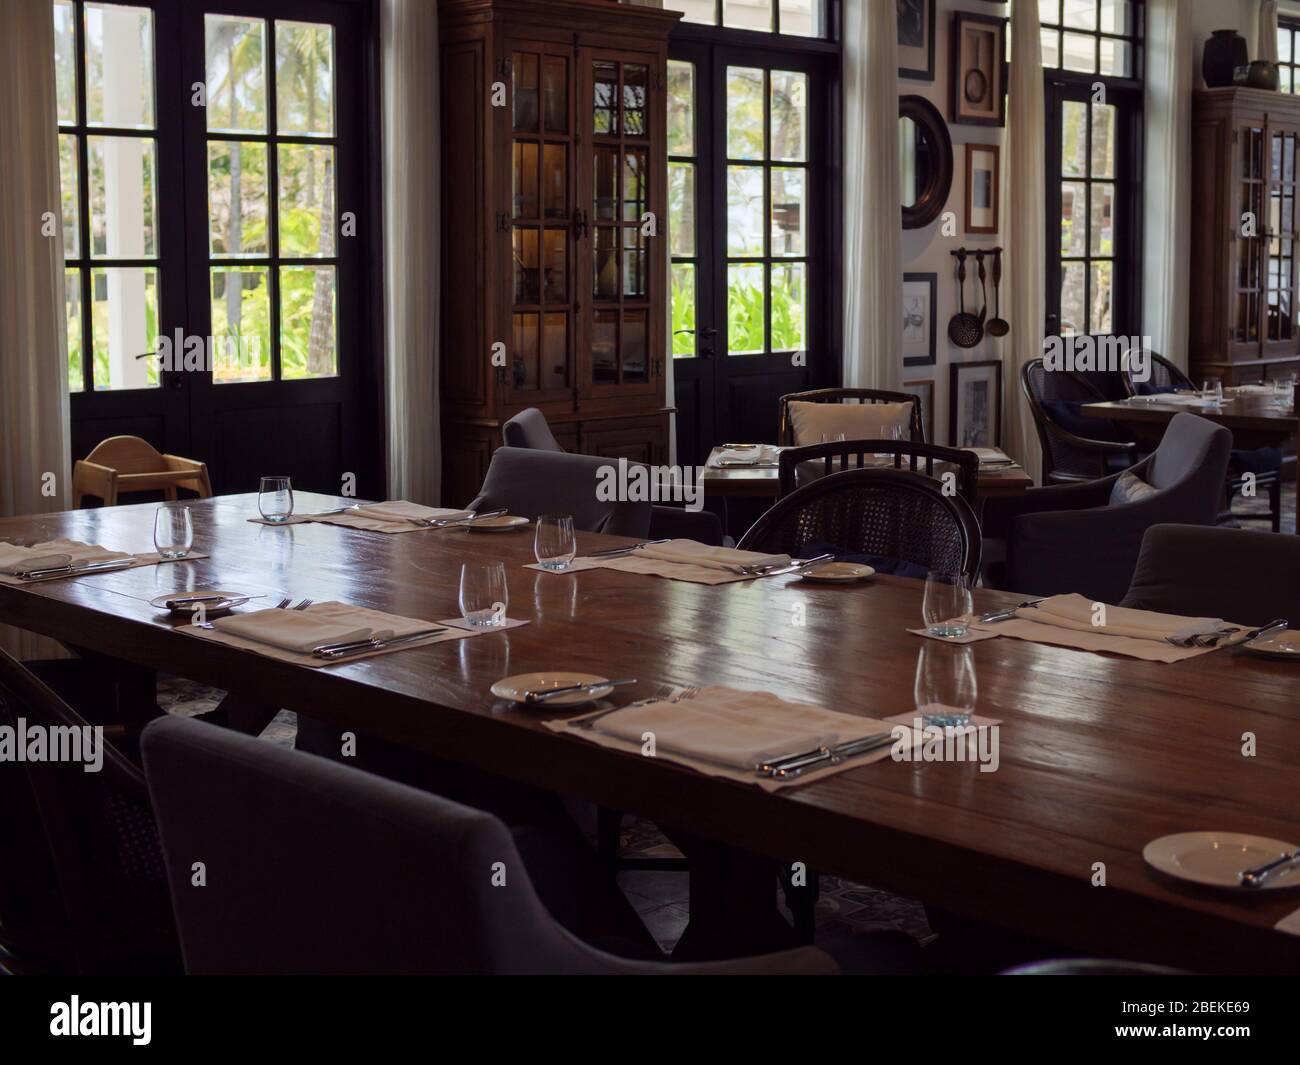 BINTAN, INDONESIA – 7 MAR 2020 – Set table in the interior of an empty Western / European style restaurant in a beach holiday resort with dark wood fu Stock Photo